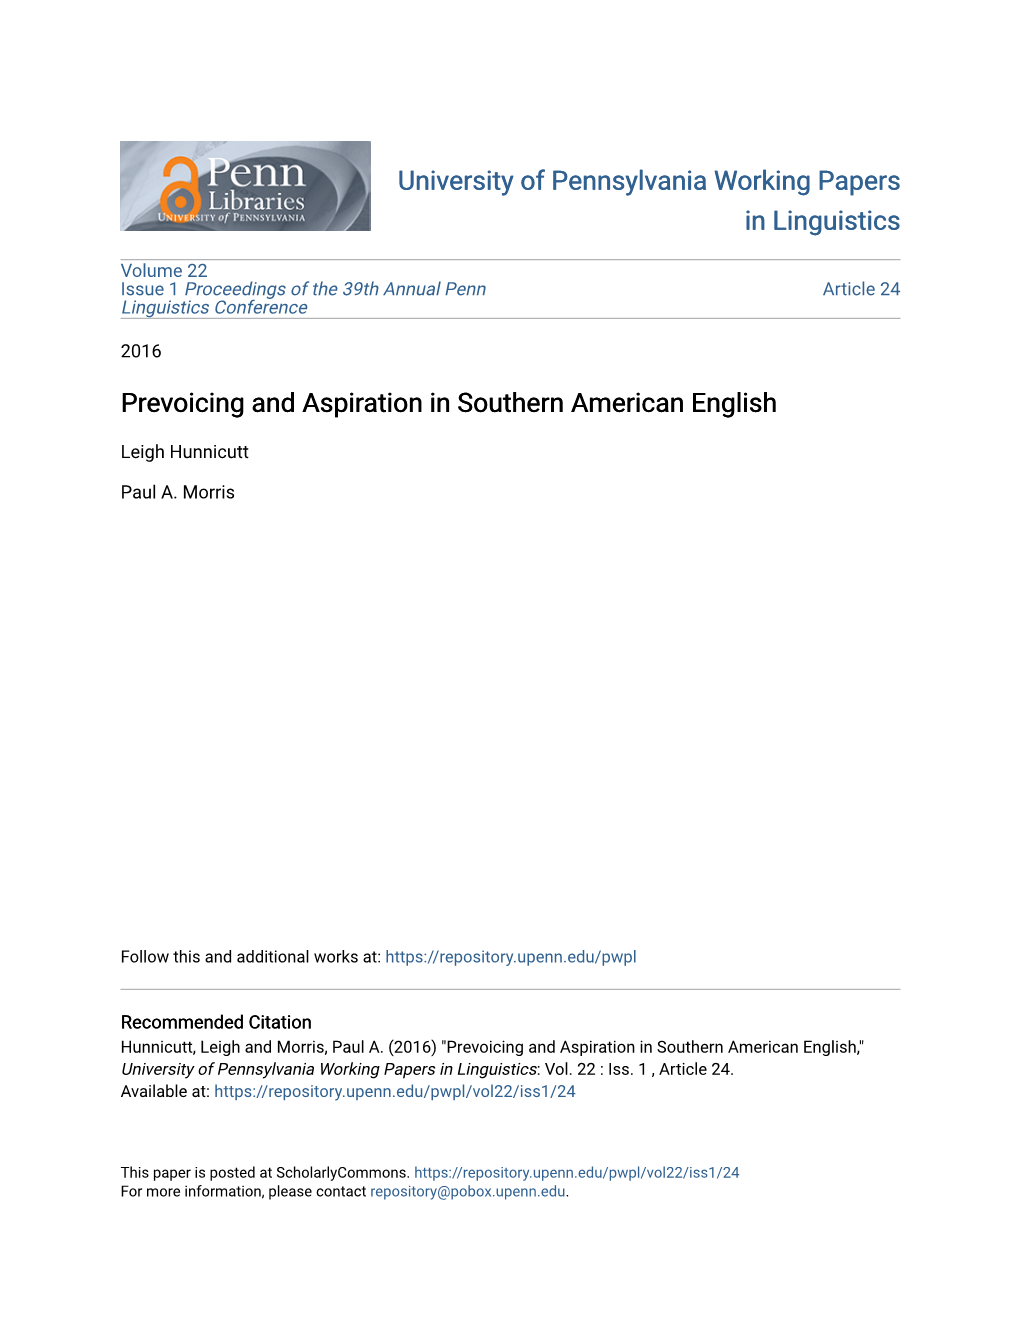 Prevoicing and Aspiration in Southern American English